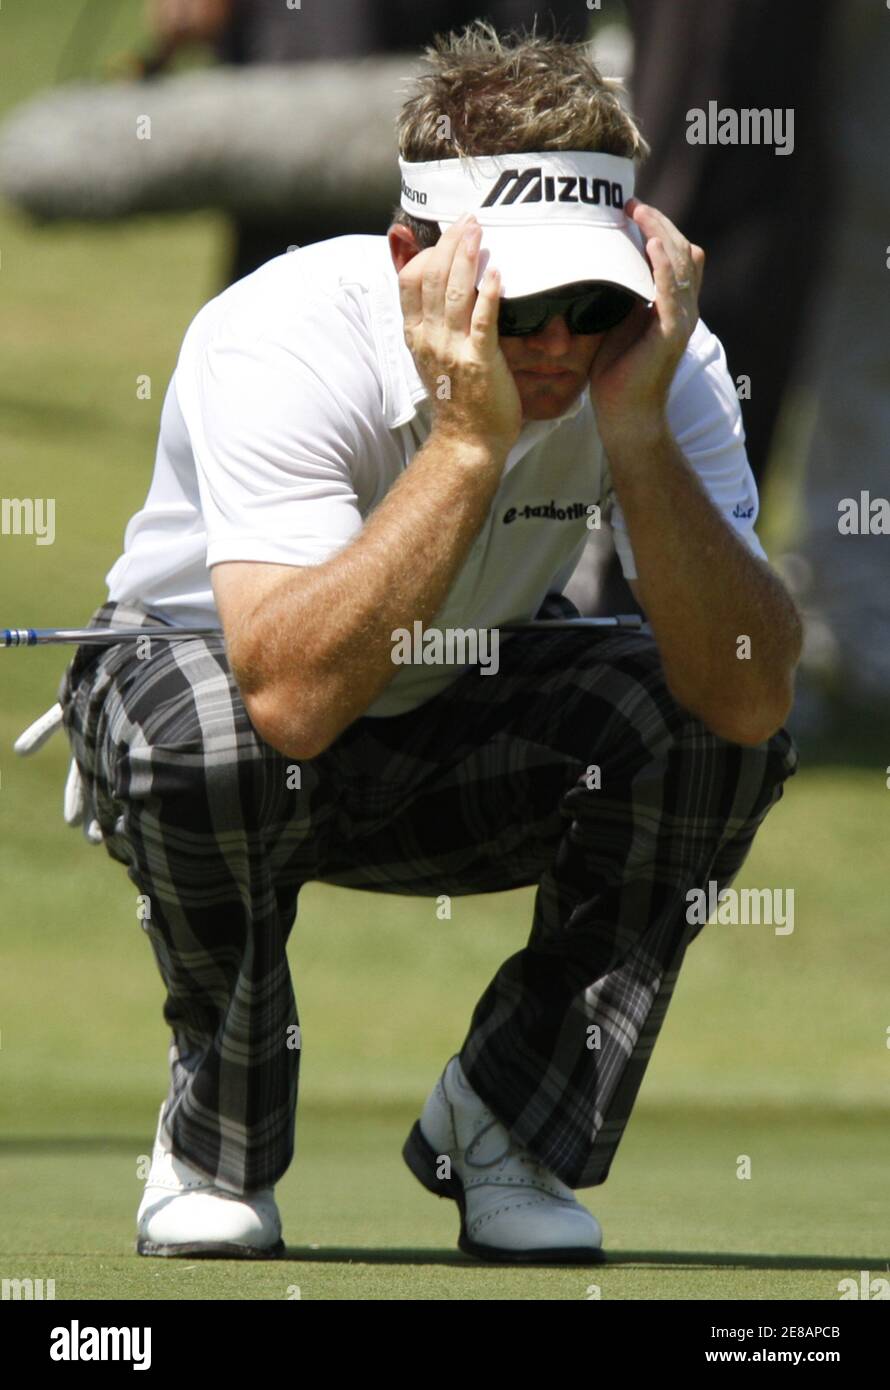 Brian Gay lines up his putt after coming out of a greenside bunker on the seventh green during the final round of the St. Jude Classic golf tournament at TPC Southwind in Memphis, Tennessee June 14, 2009.   REUTERS/Nikki Boertman    (UNITED STATES SPORT GOLF) Stock Photo